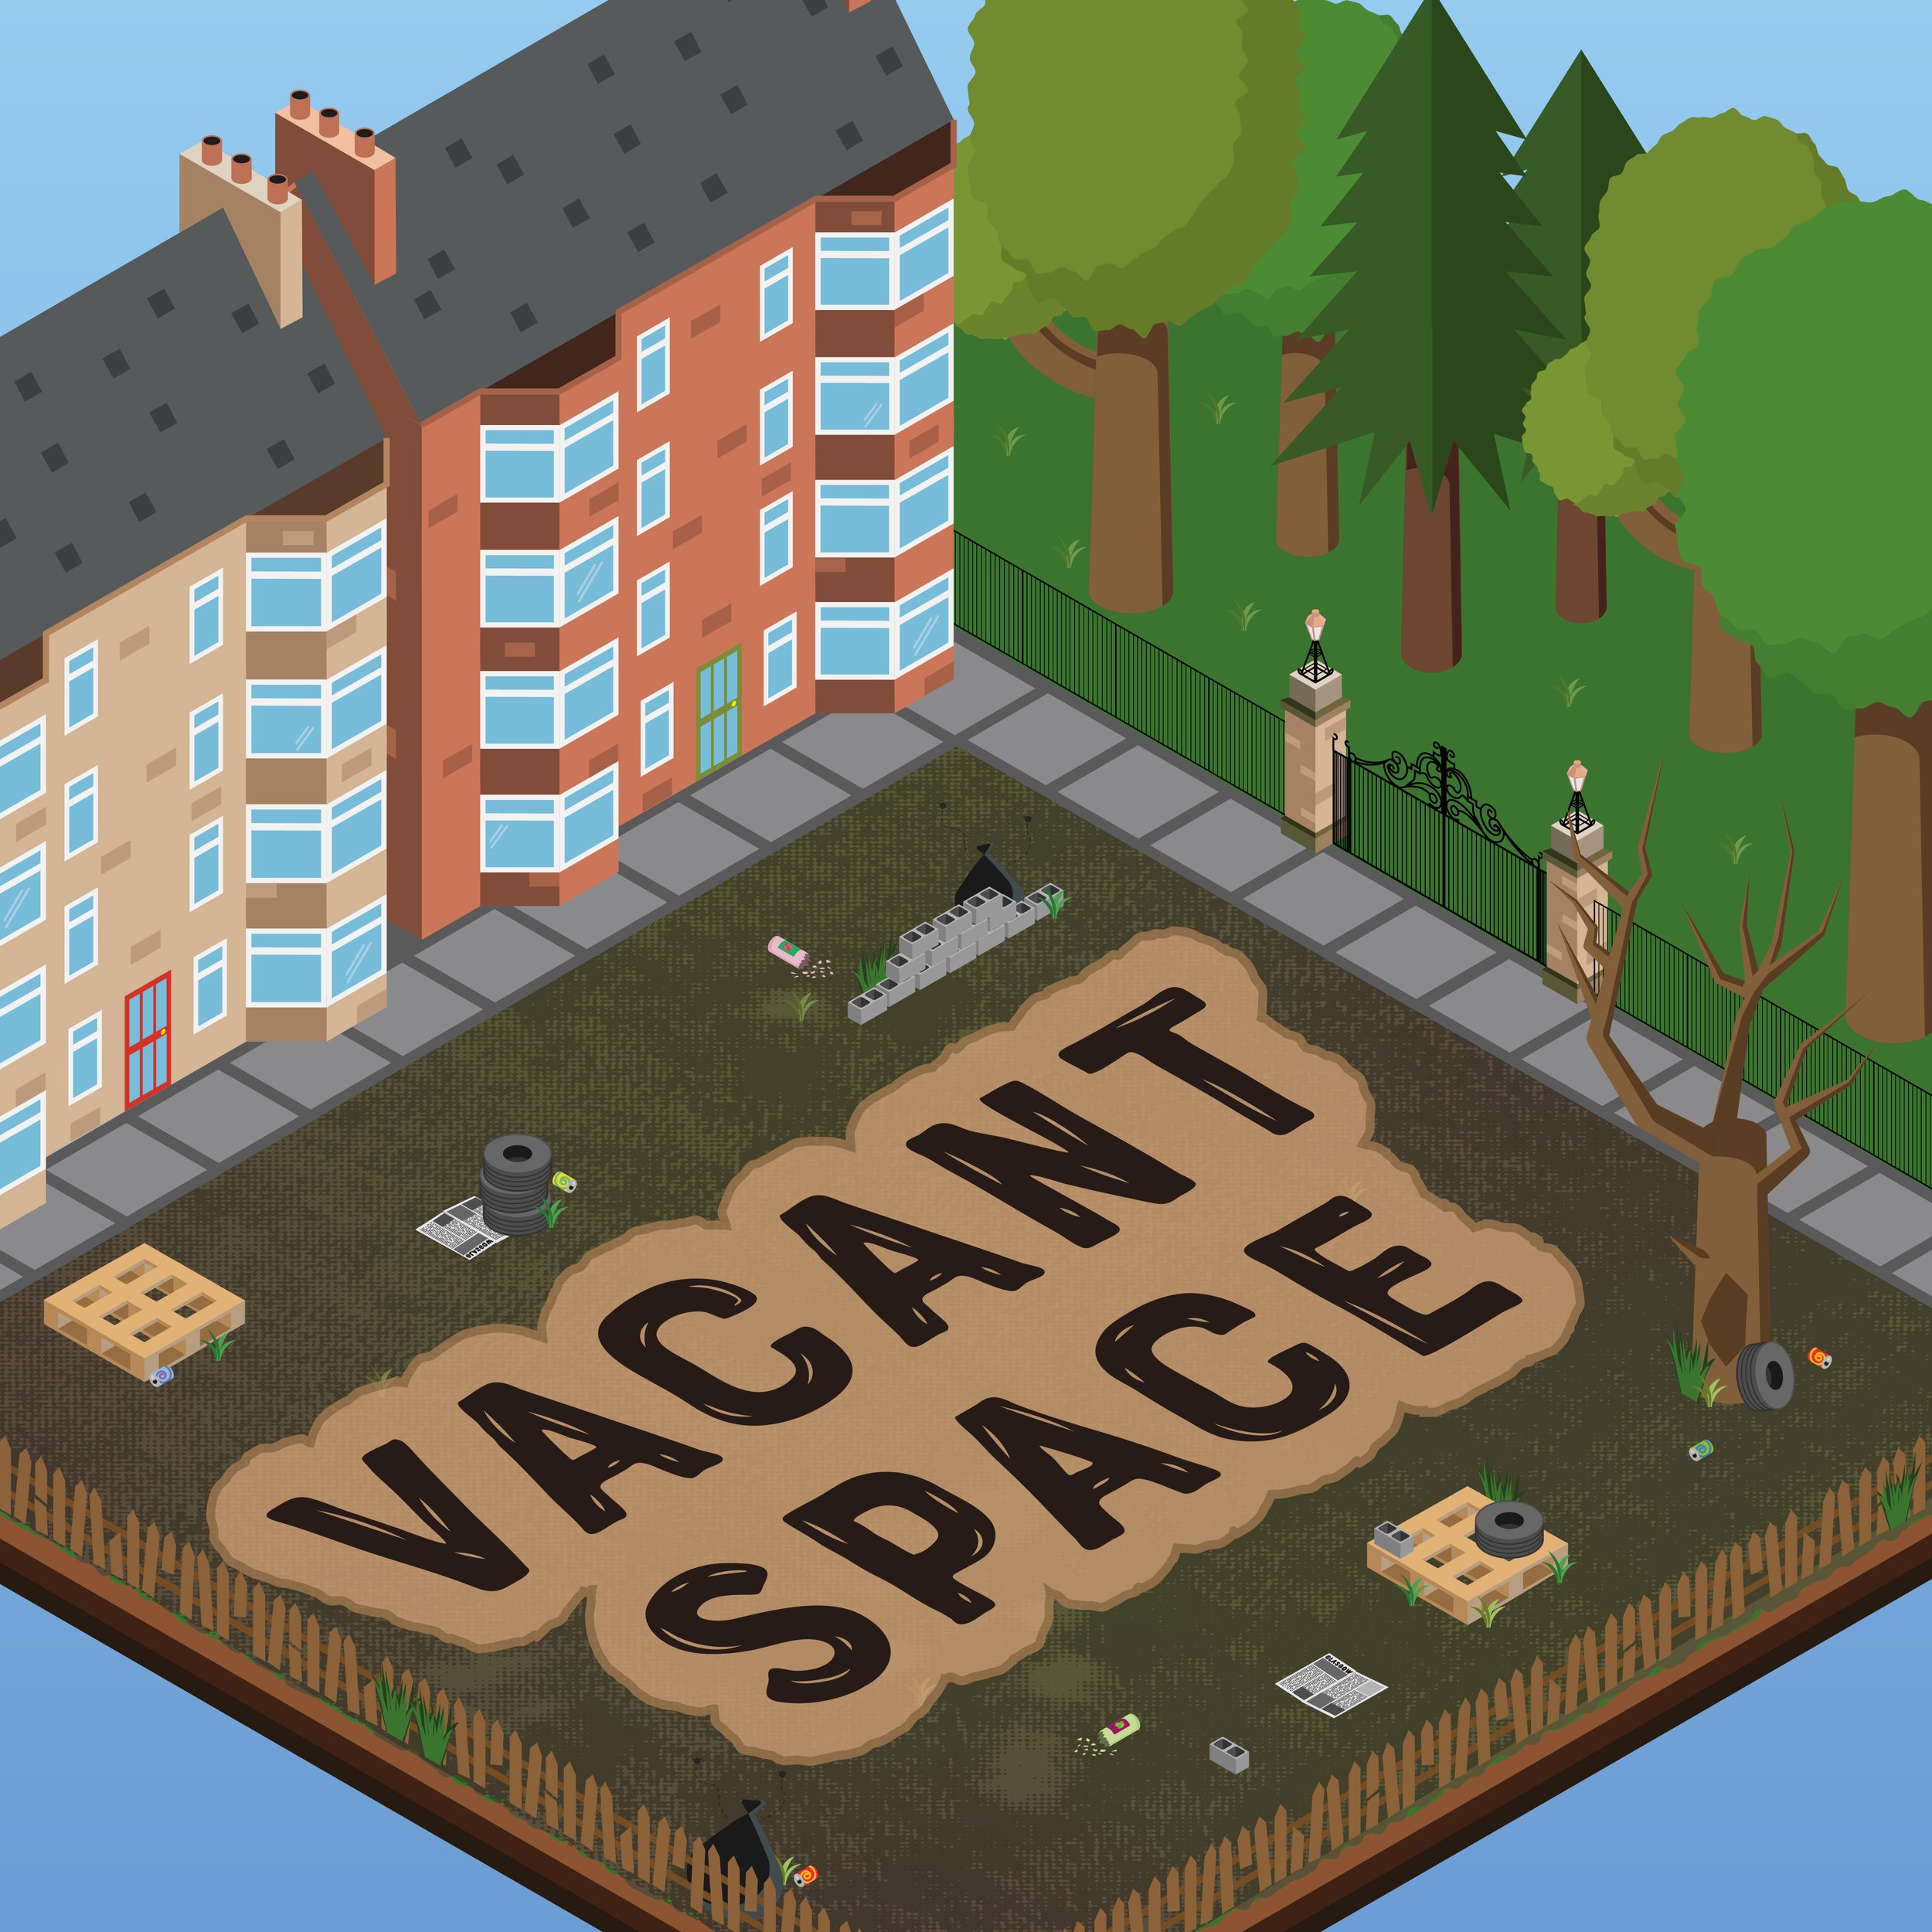 South Seeds Vacant Spaces - vacant-01.jpg